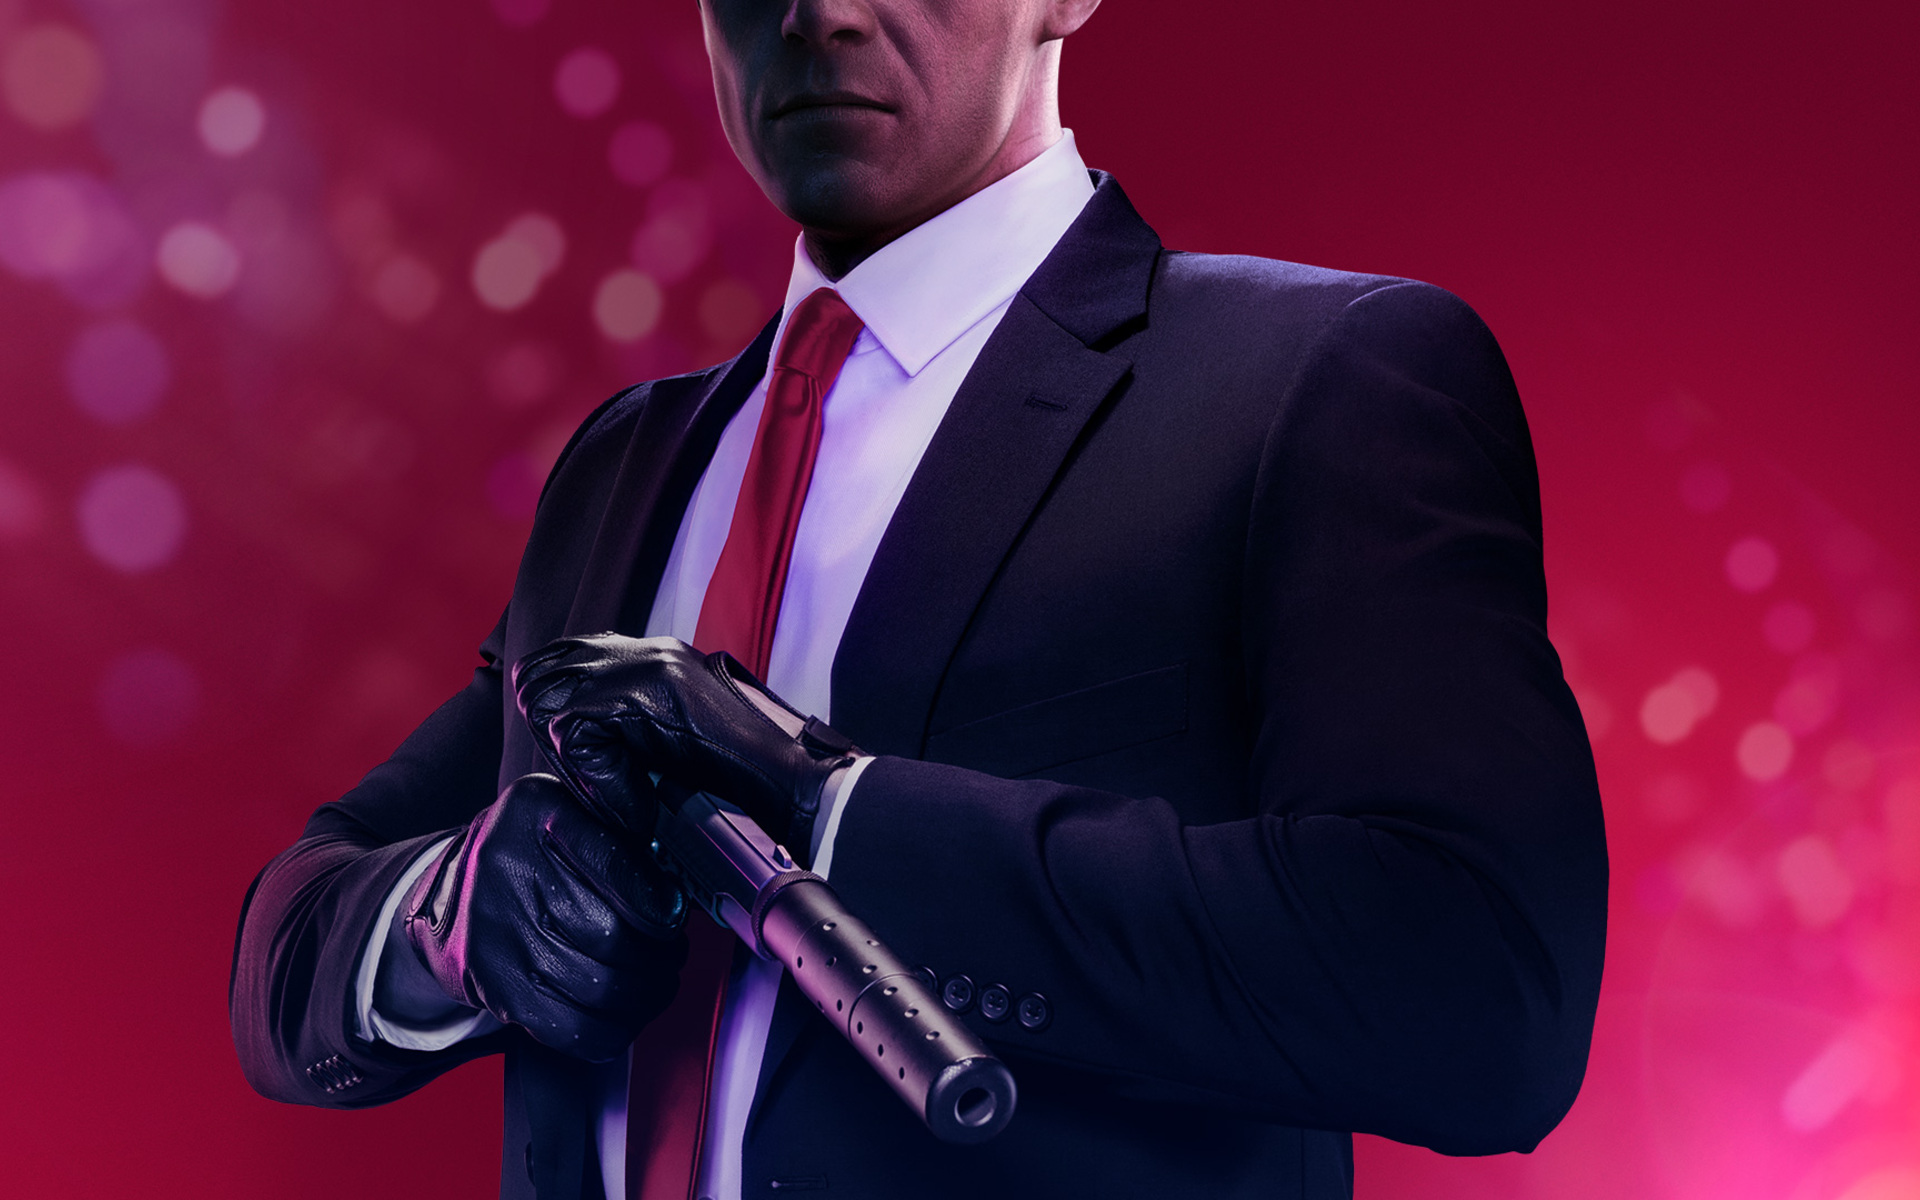 Agent 47 Hitman 2 Game Wallpaper In 1920x1200 Resolution